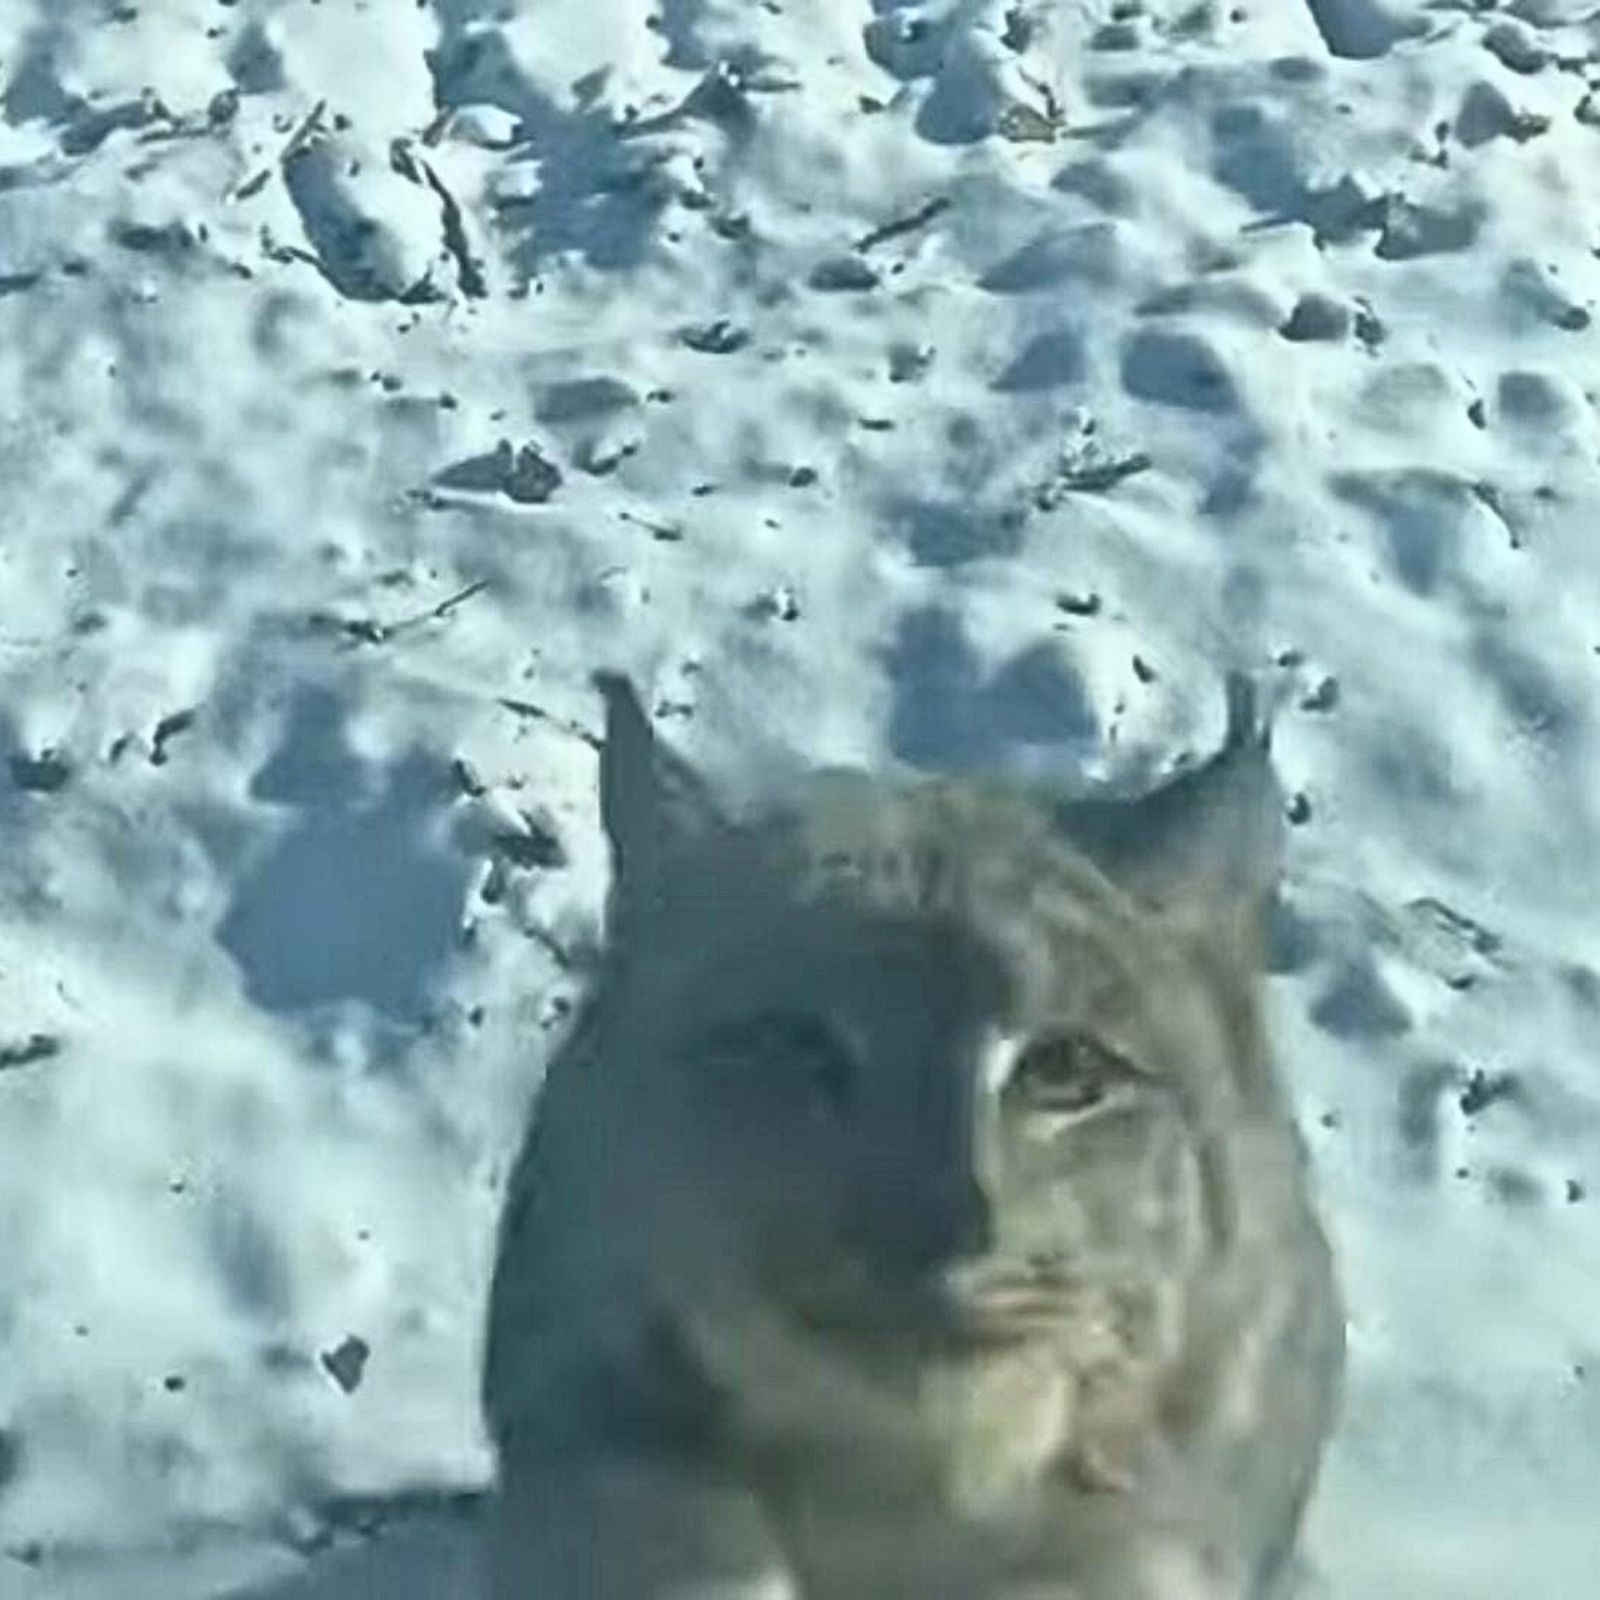 lynx leaping at driver's window